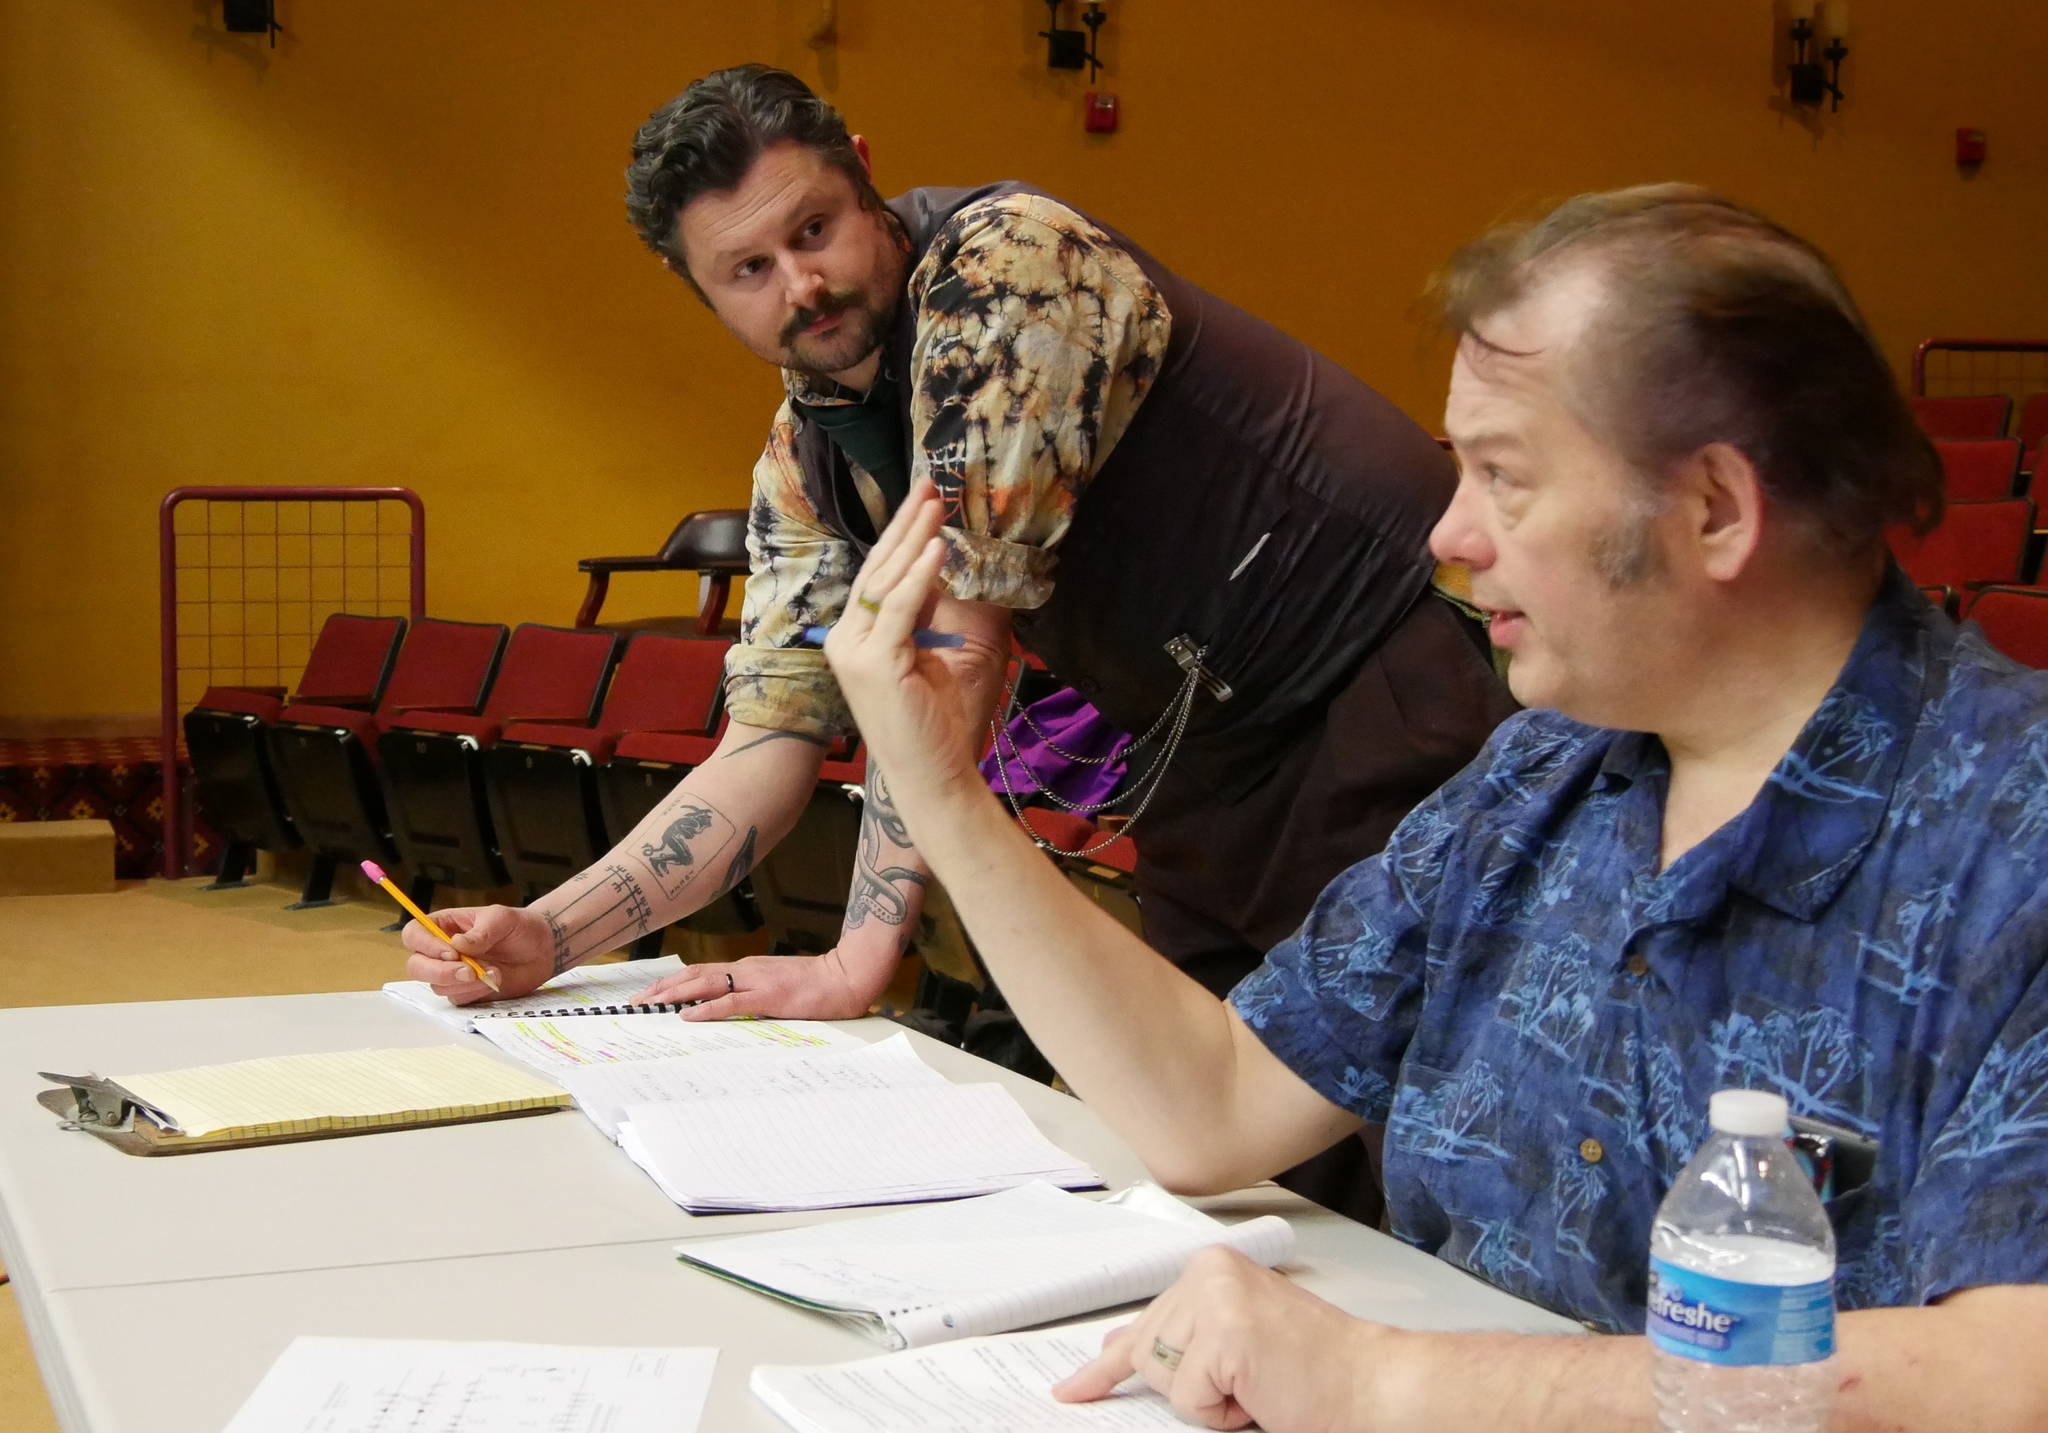 Director Richard Stephens, right, gives notes on “blocking” (actors’ positioning and movement on stage) while stage manager E.J. Anderson III records the information for future rehearsals. Photo courtesy of Olympic Theatre Arts